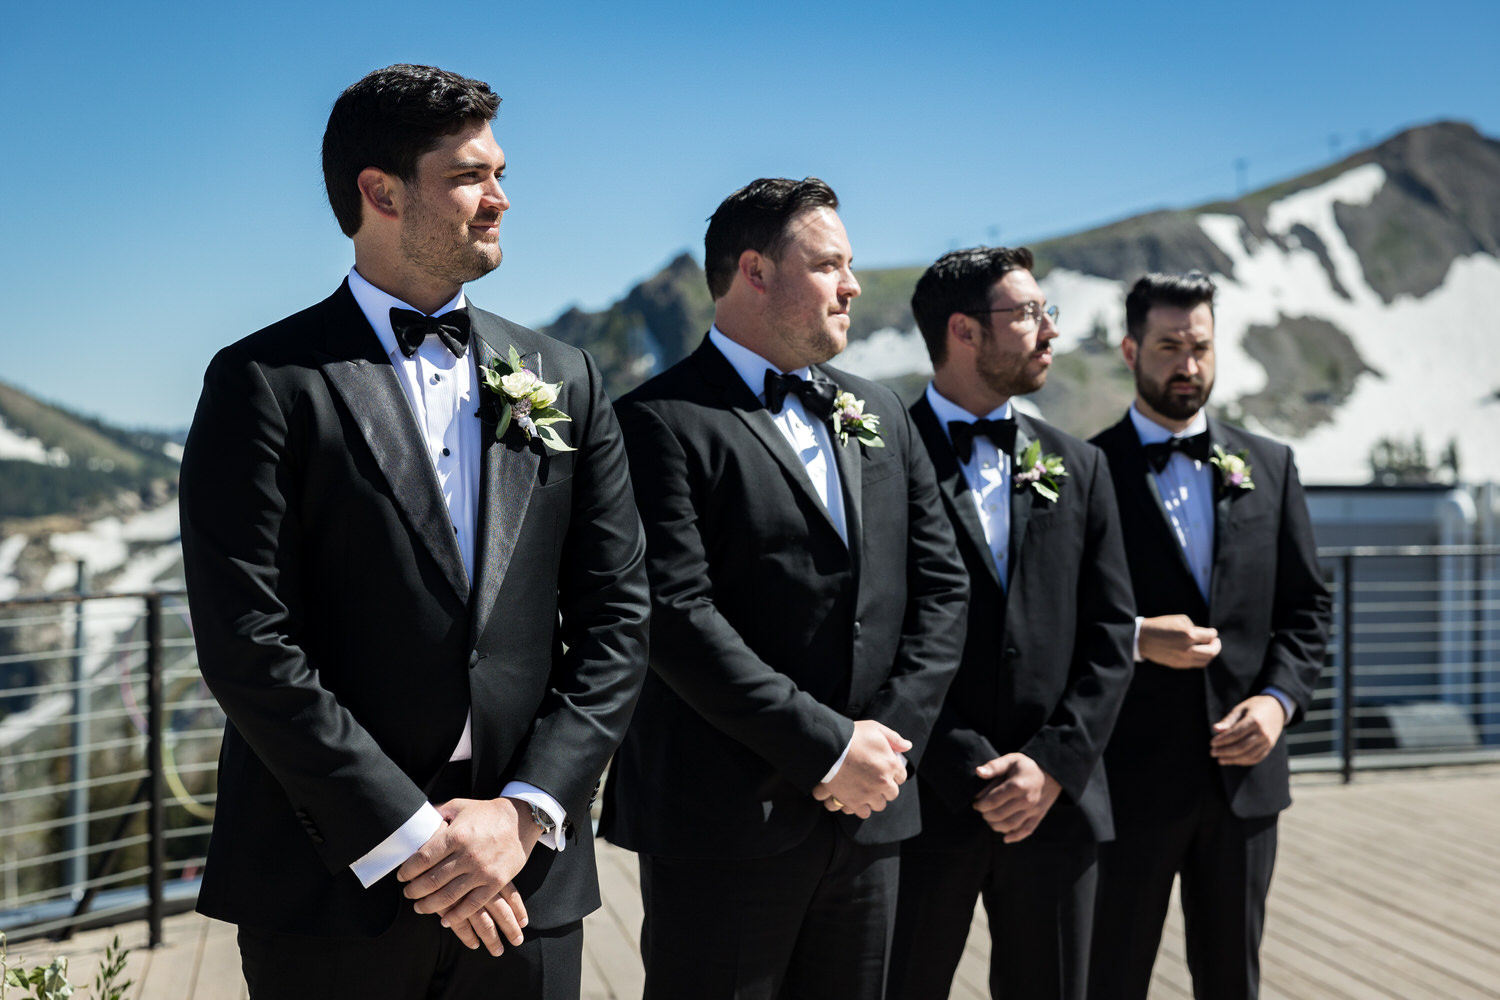 A groom and his groomsmen wait for the bride on the High Camp deck.